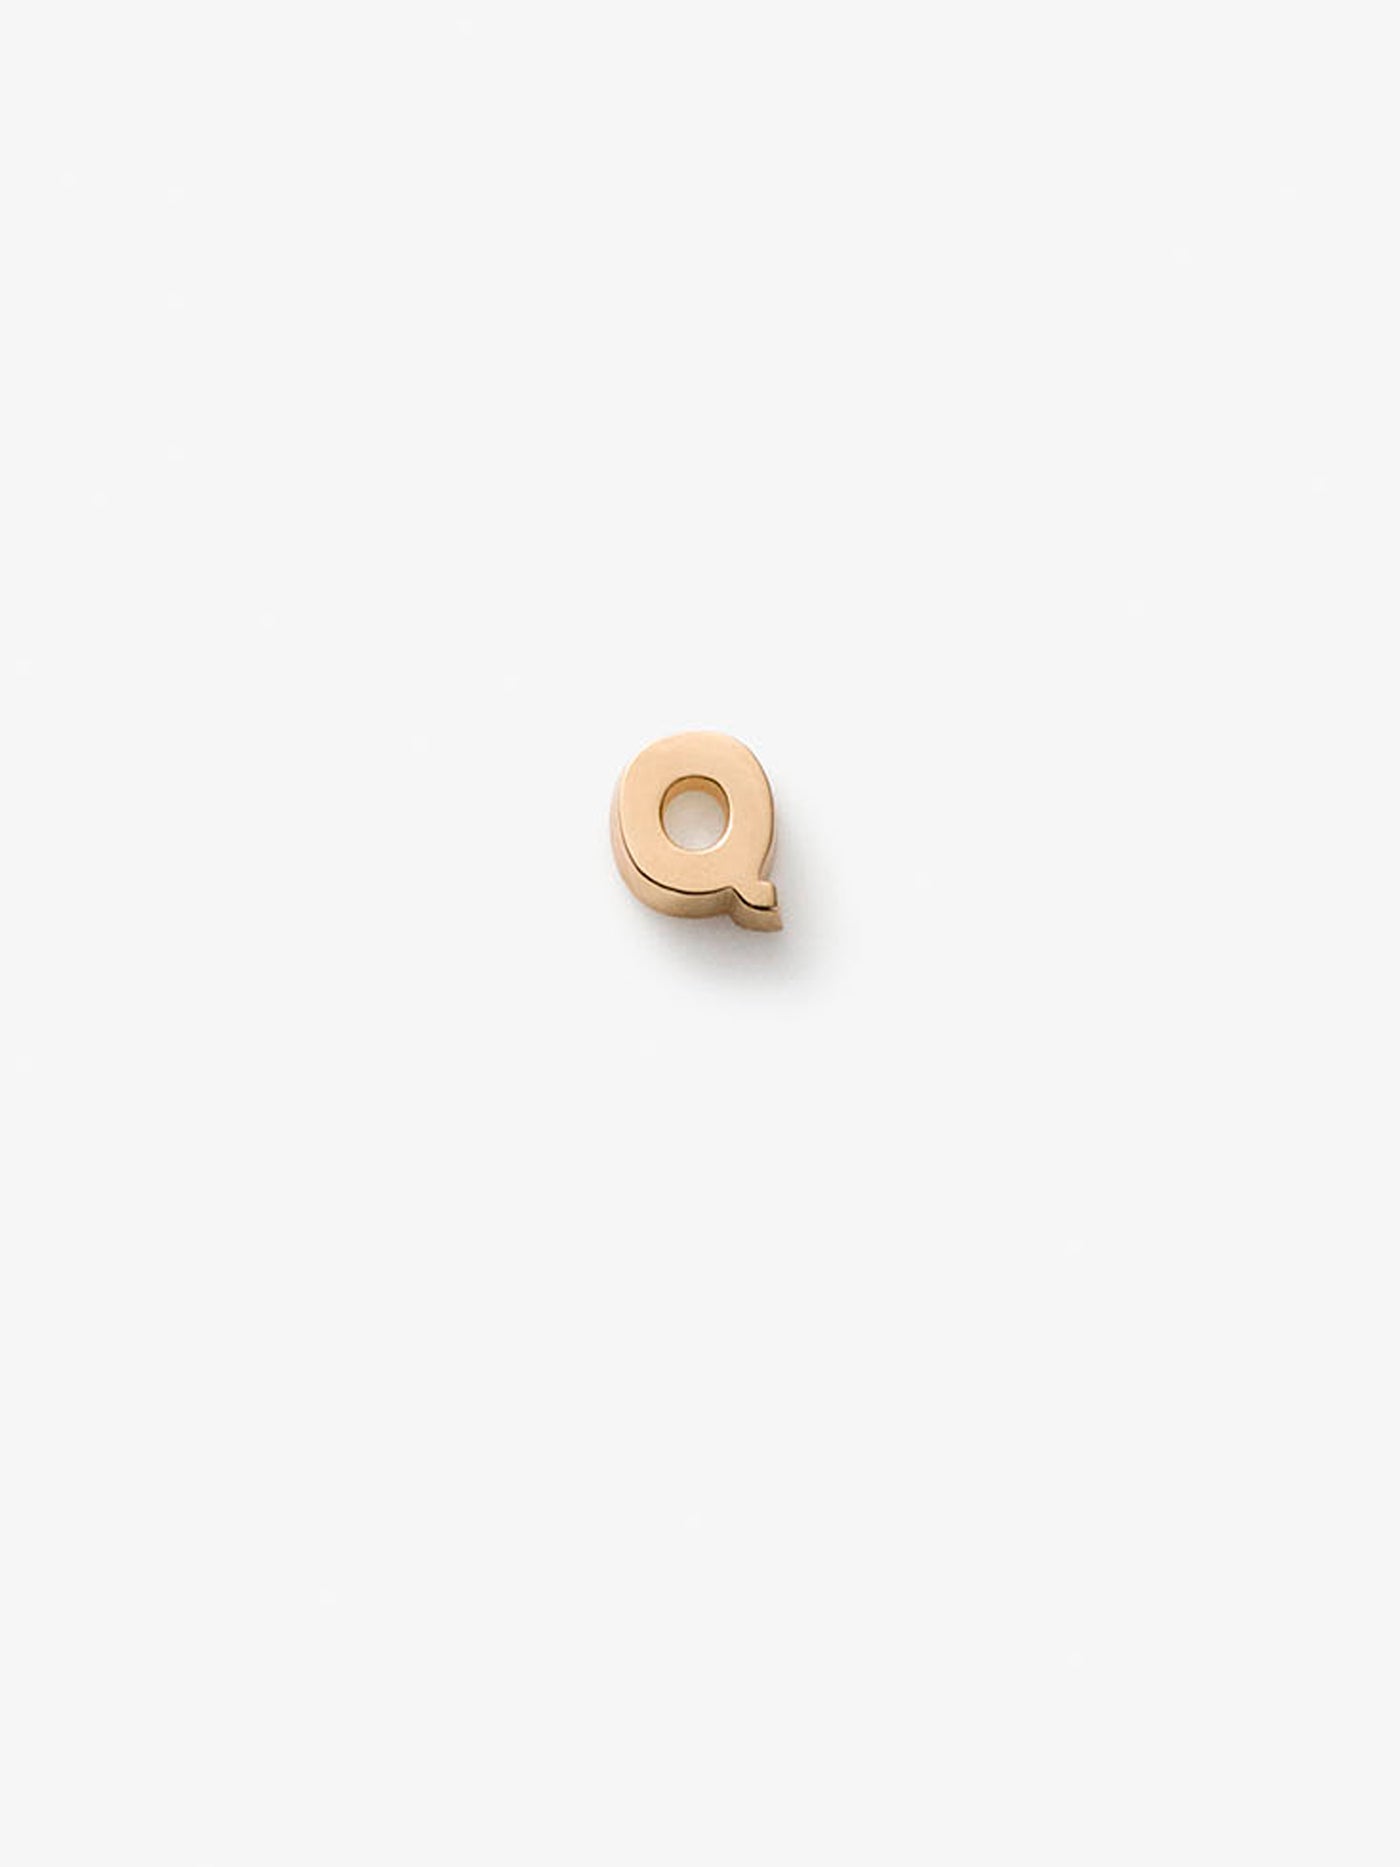 One Letter Q in 18k Gold